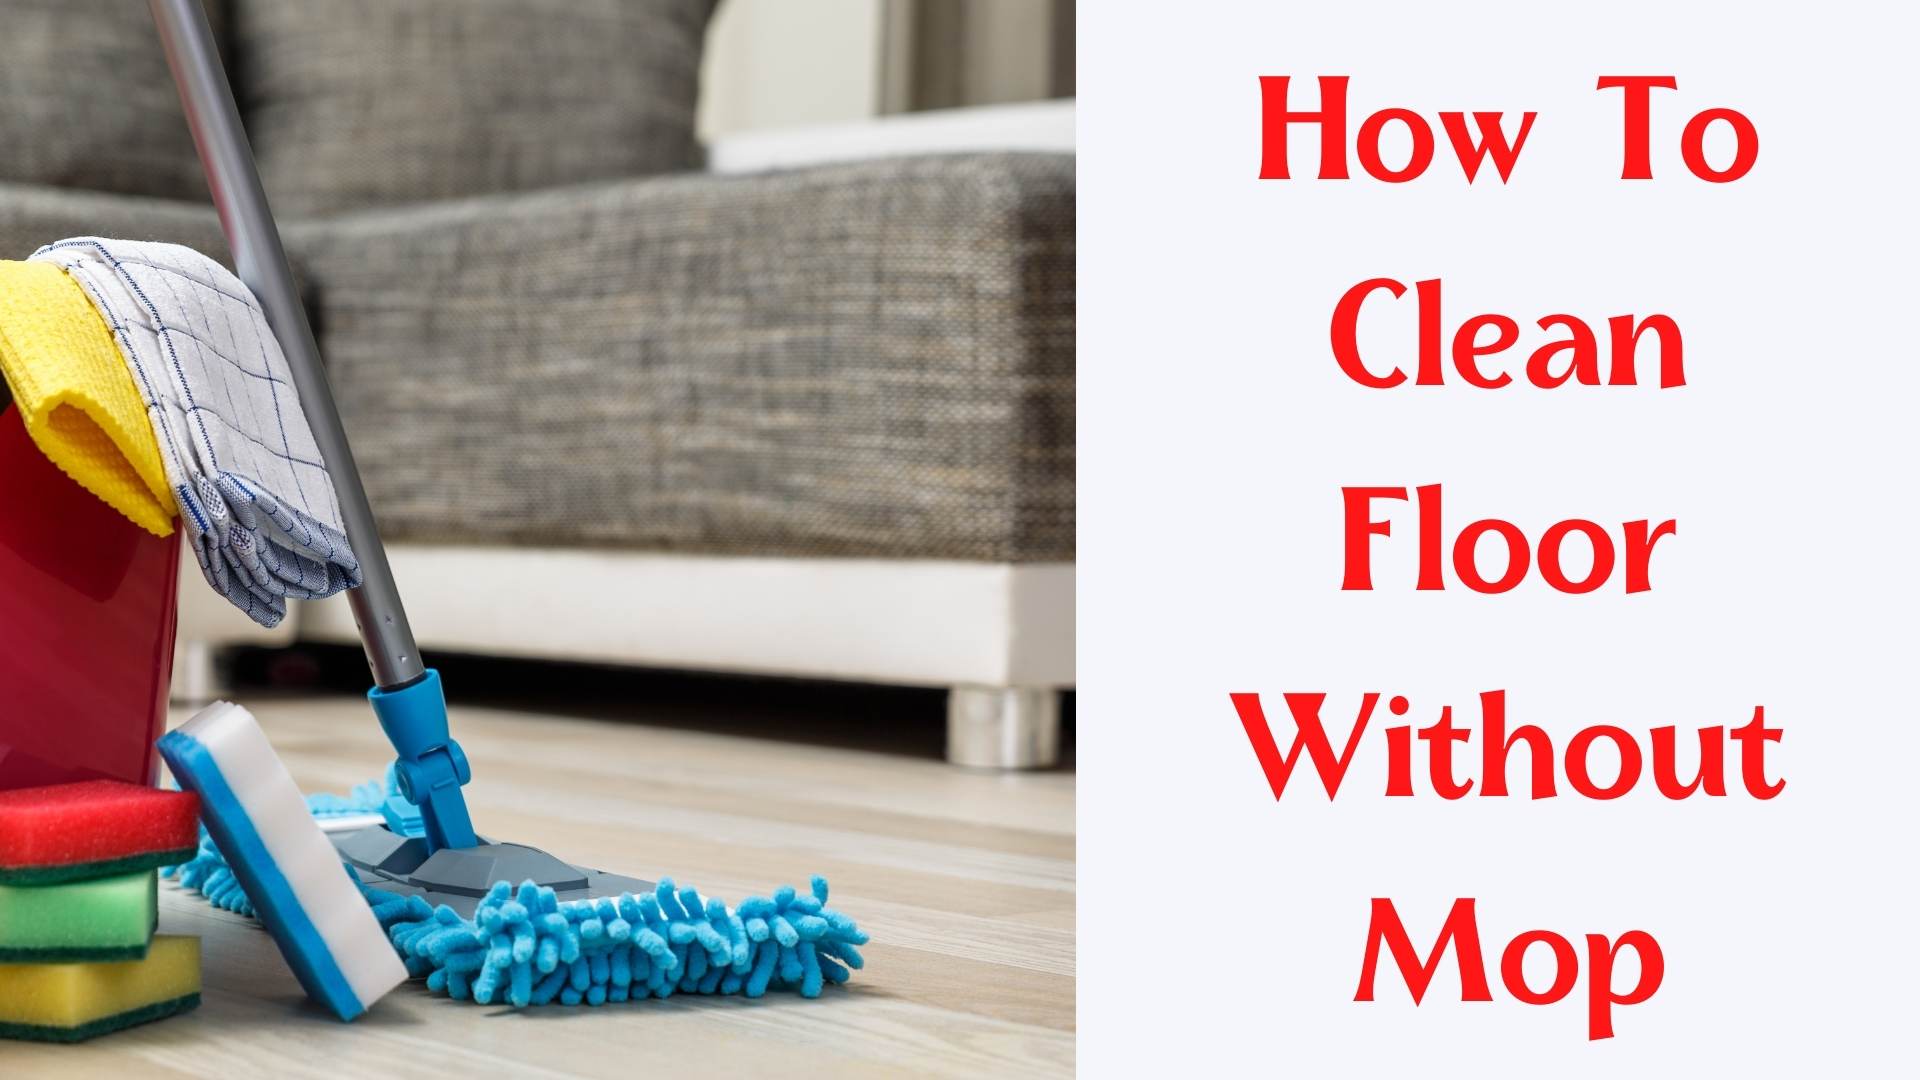 How To Clean Floor Without Mop (Update 2021)